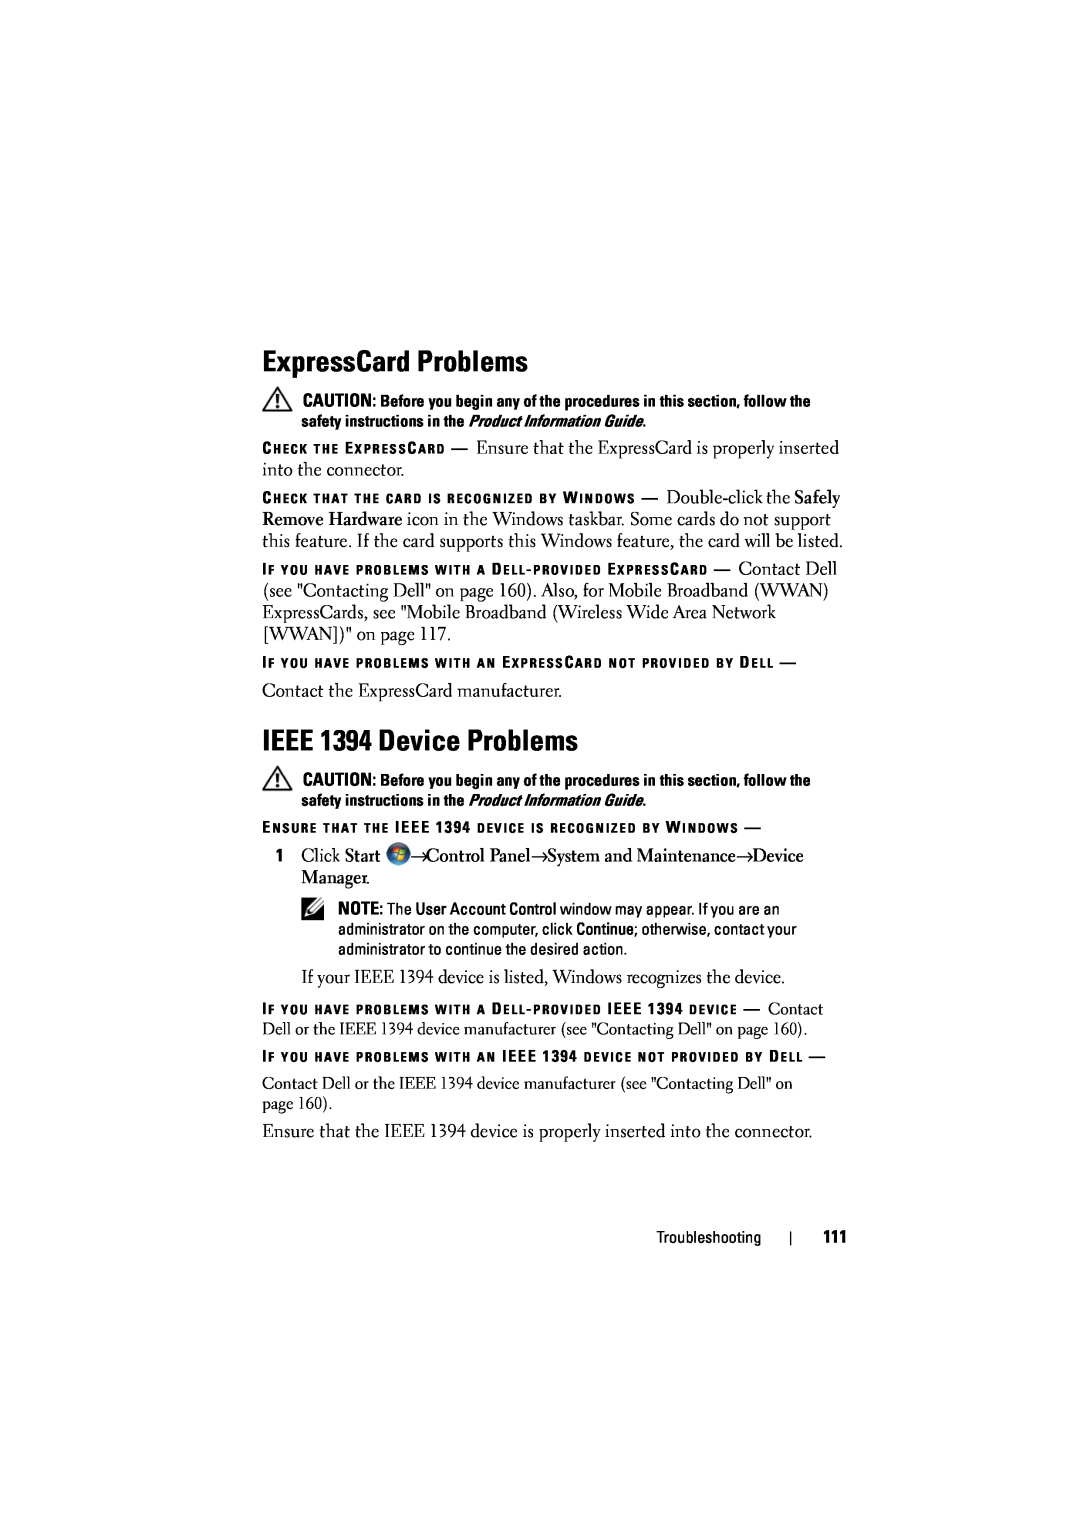 Dell 1526, 1525 owner manual ExpressCard Problems, IEEE 1394 Device Problems 